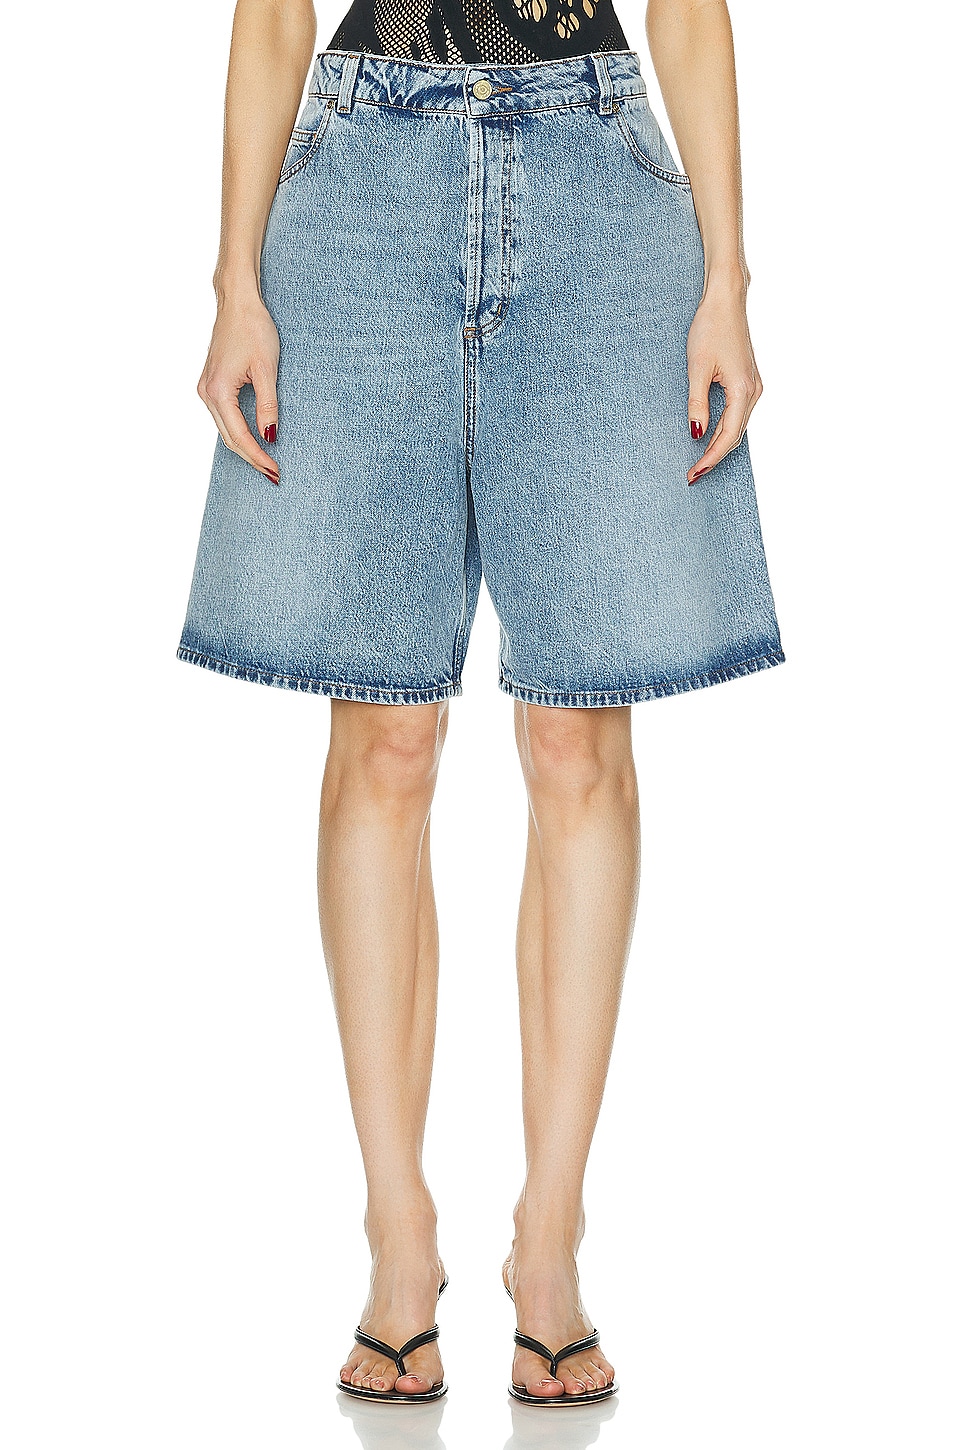 Image 1 of Heavy Manners Baggy Denim Short in Babygirl